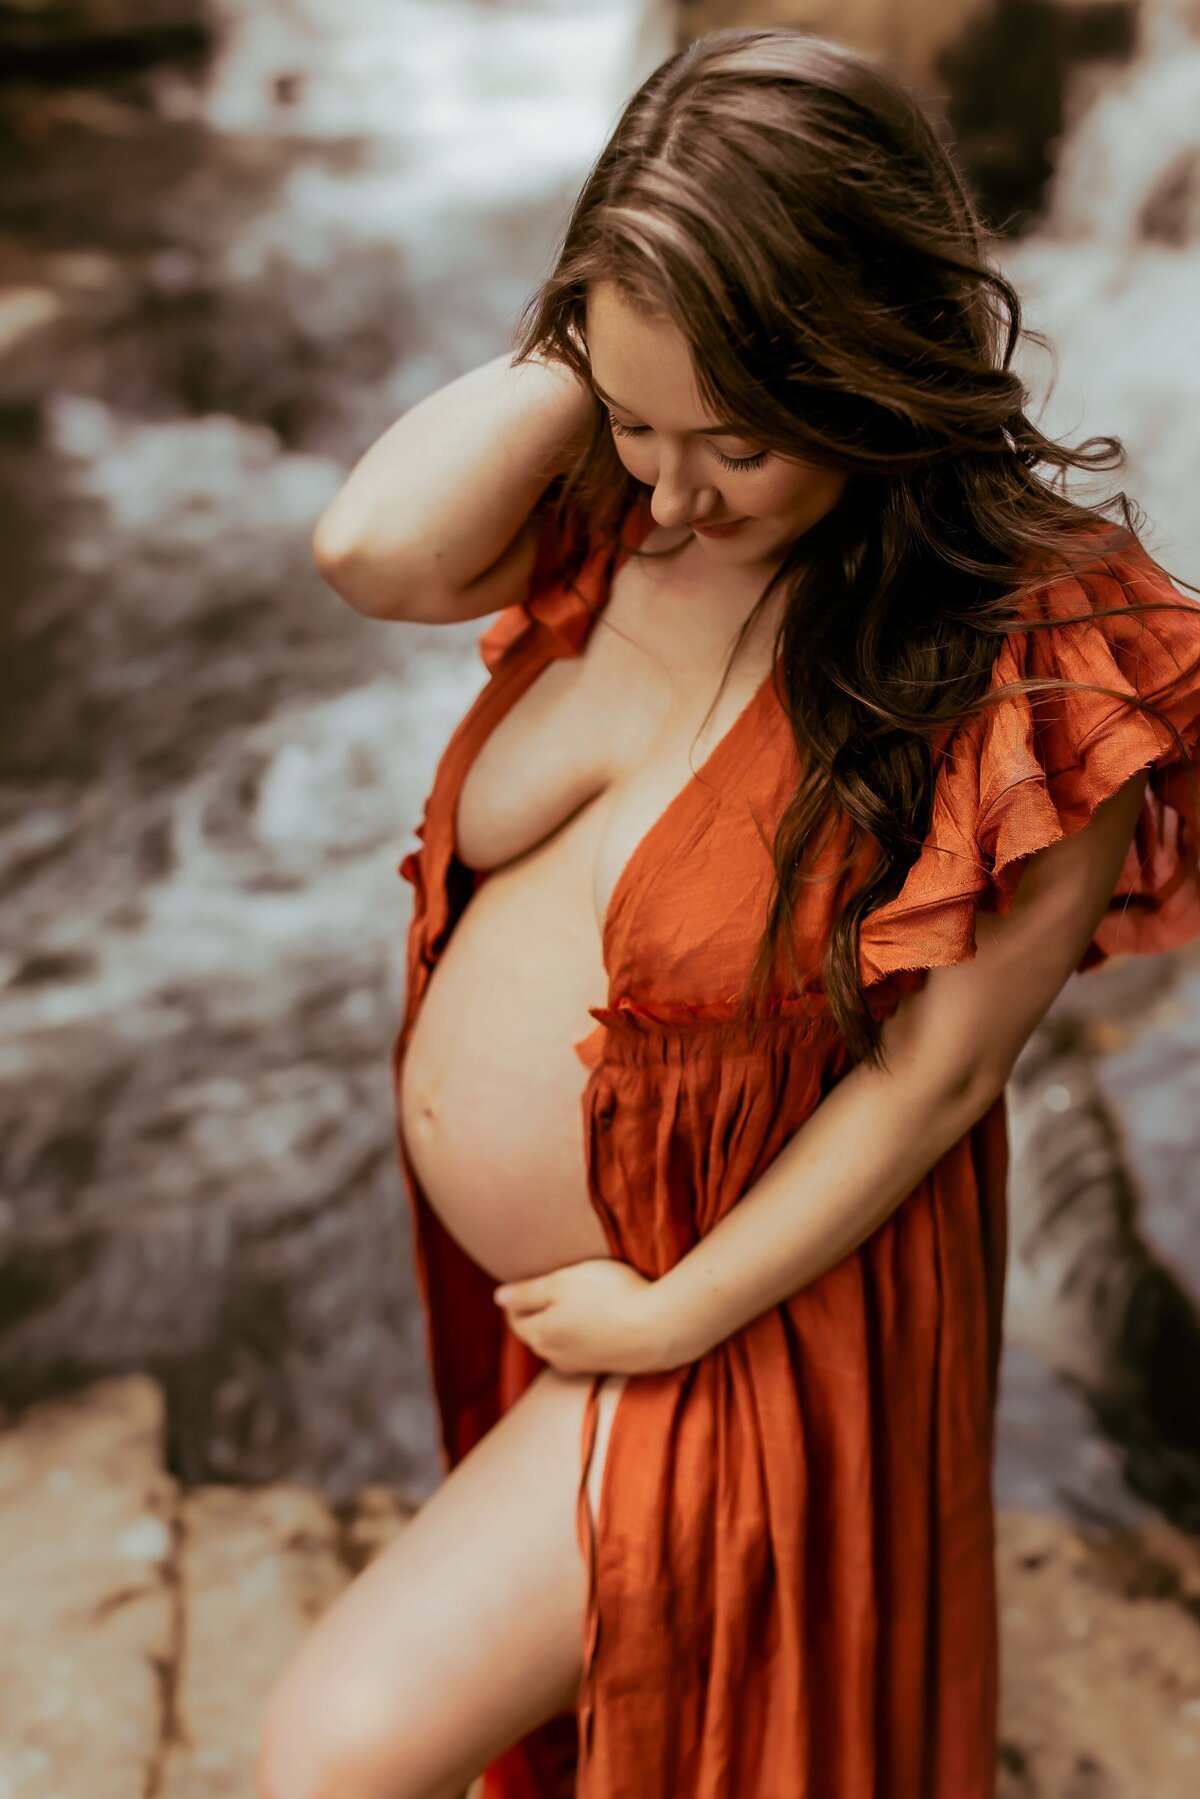 A pregnant woman in an orange dress stands beside a river, looking down and holding her belly.